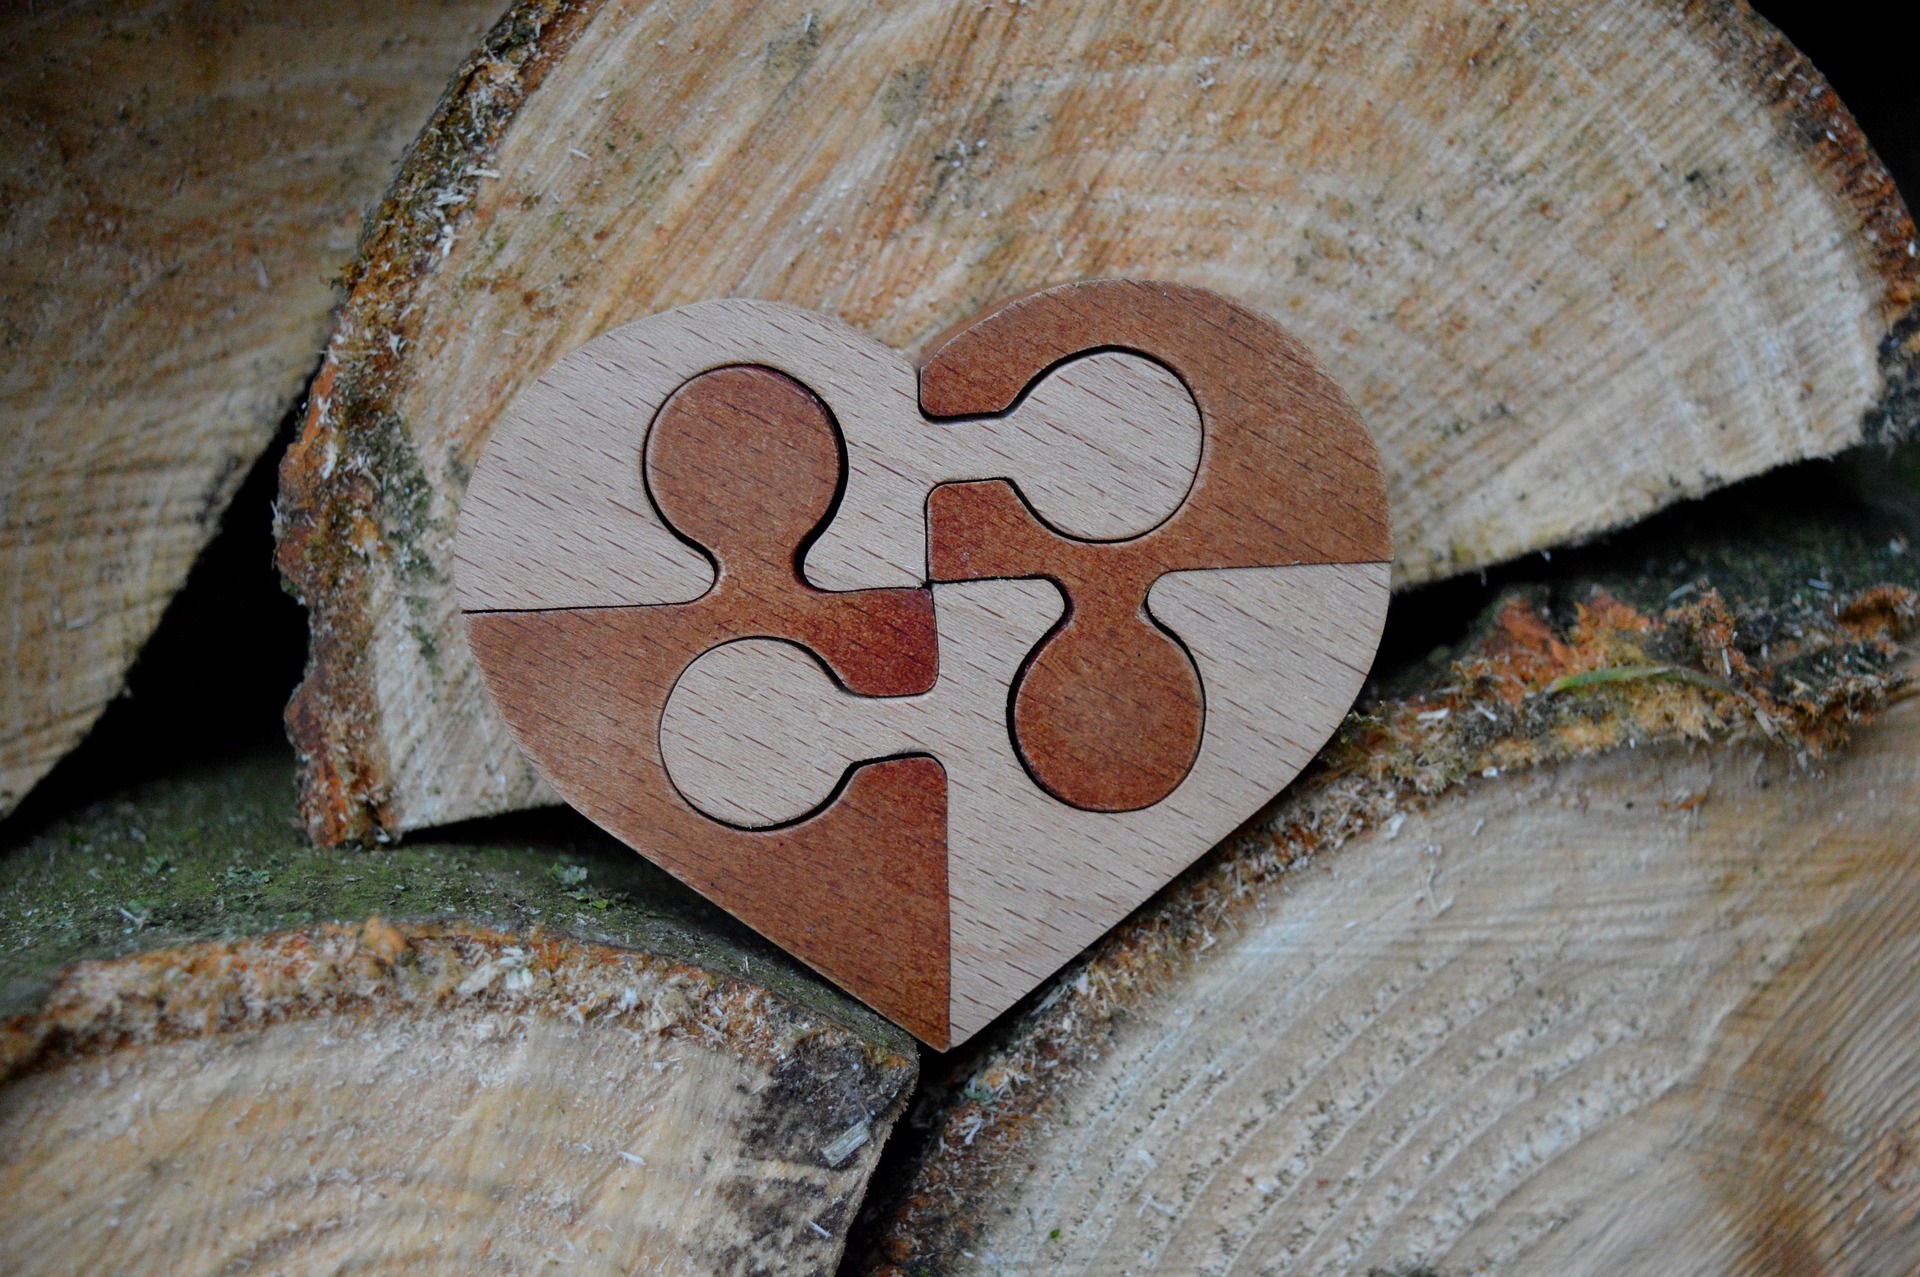 Puzzle pieces formed into a heart and carved out of wood